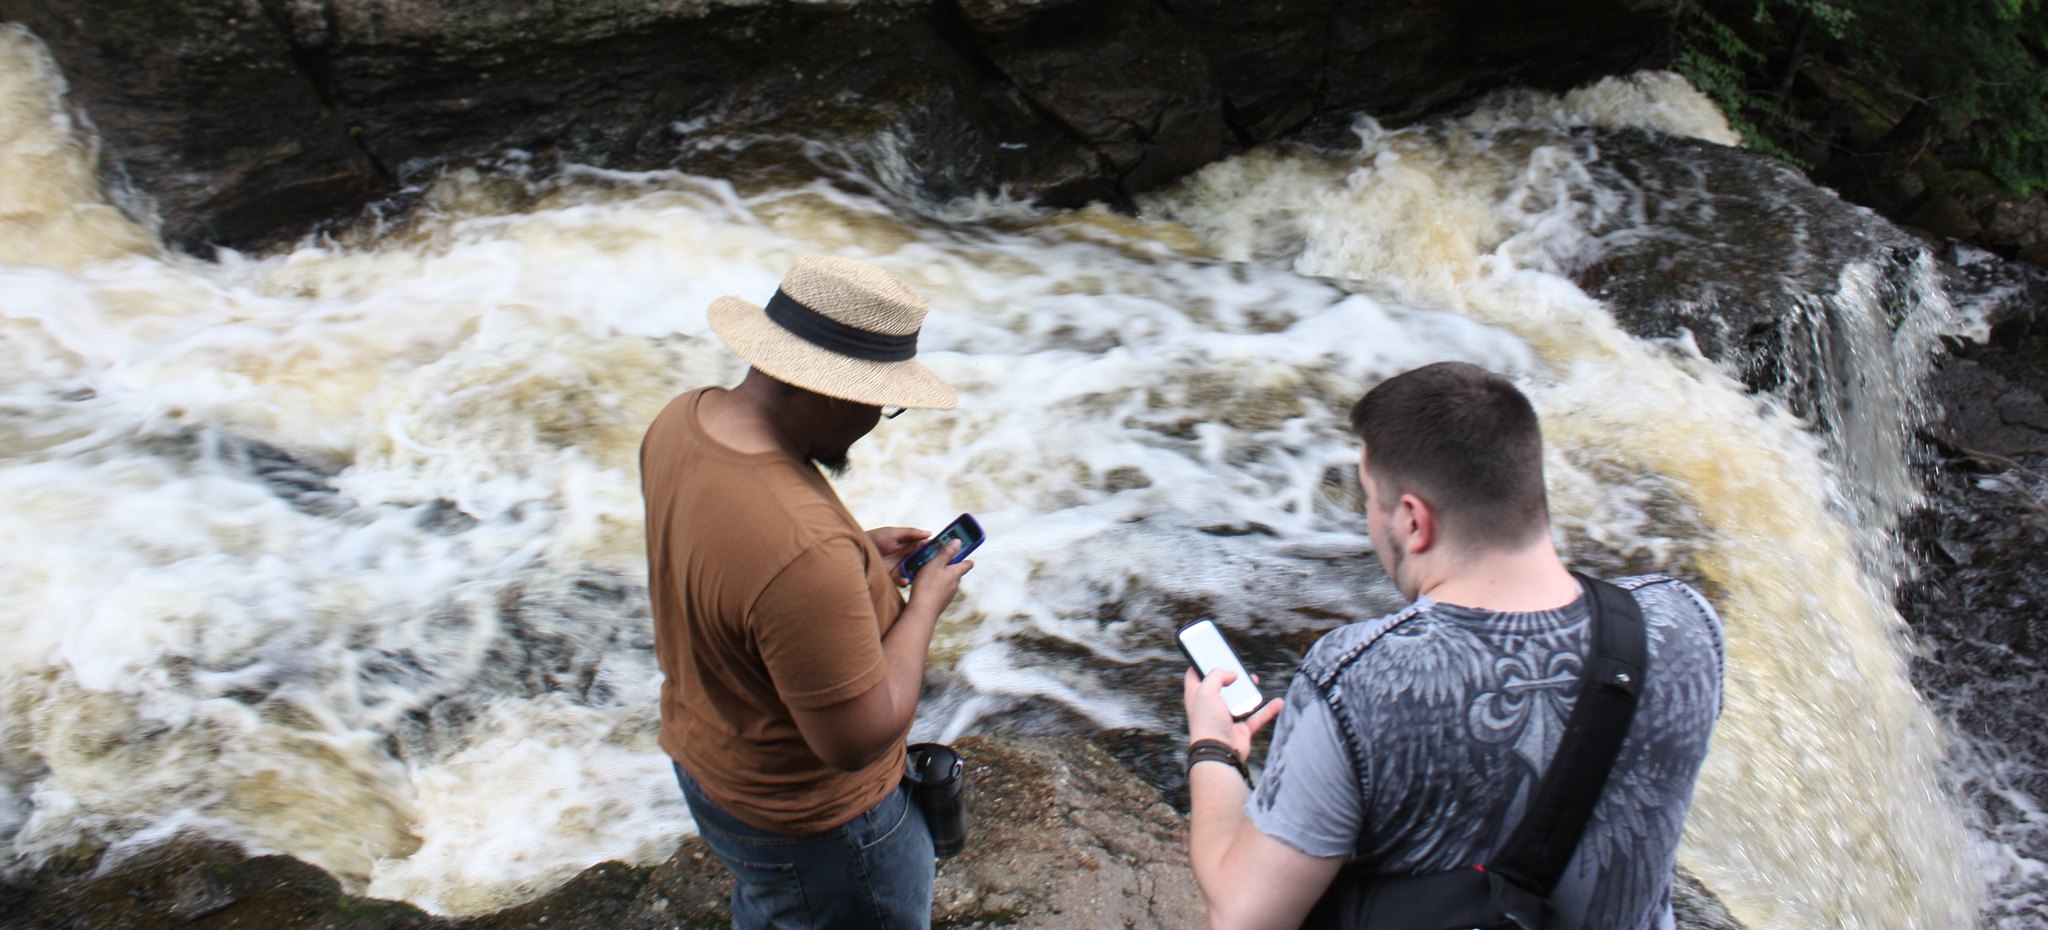 Hikers with Cell Phones - Researchers Look at the Role Uncertainty Plays in Outdoor Recreation - Parks, Recreation and Tourism Management at NC State University